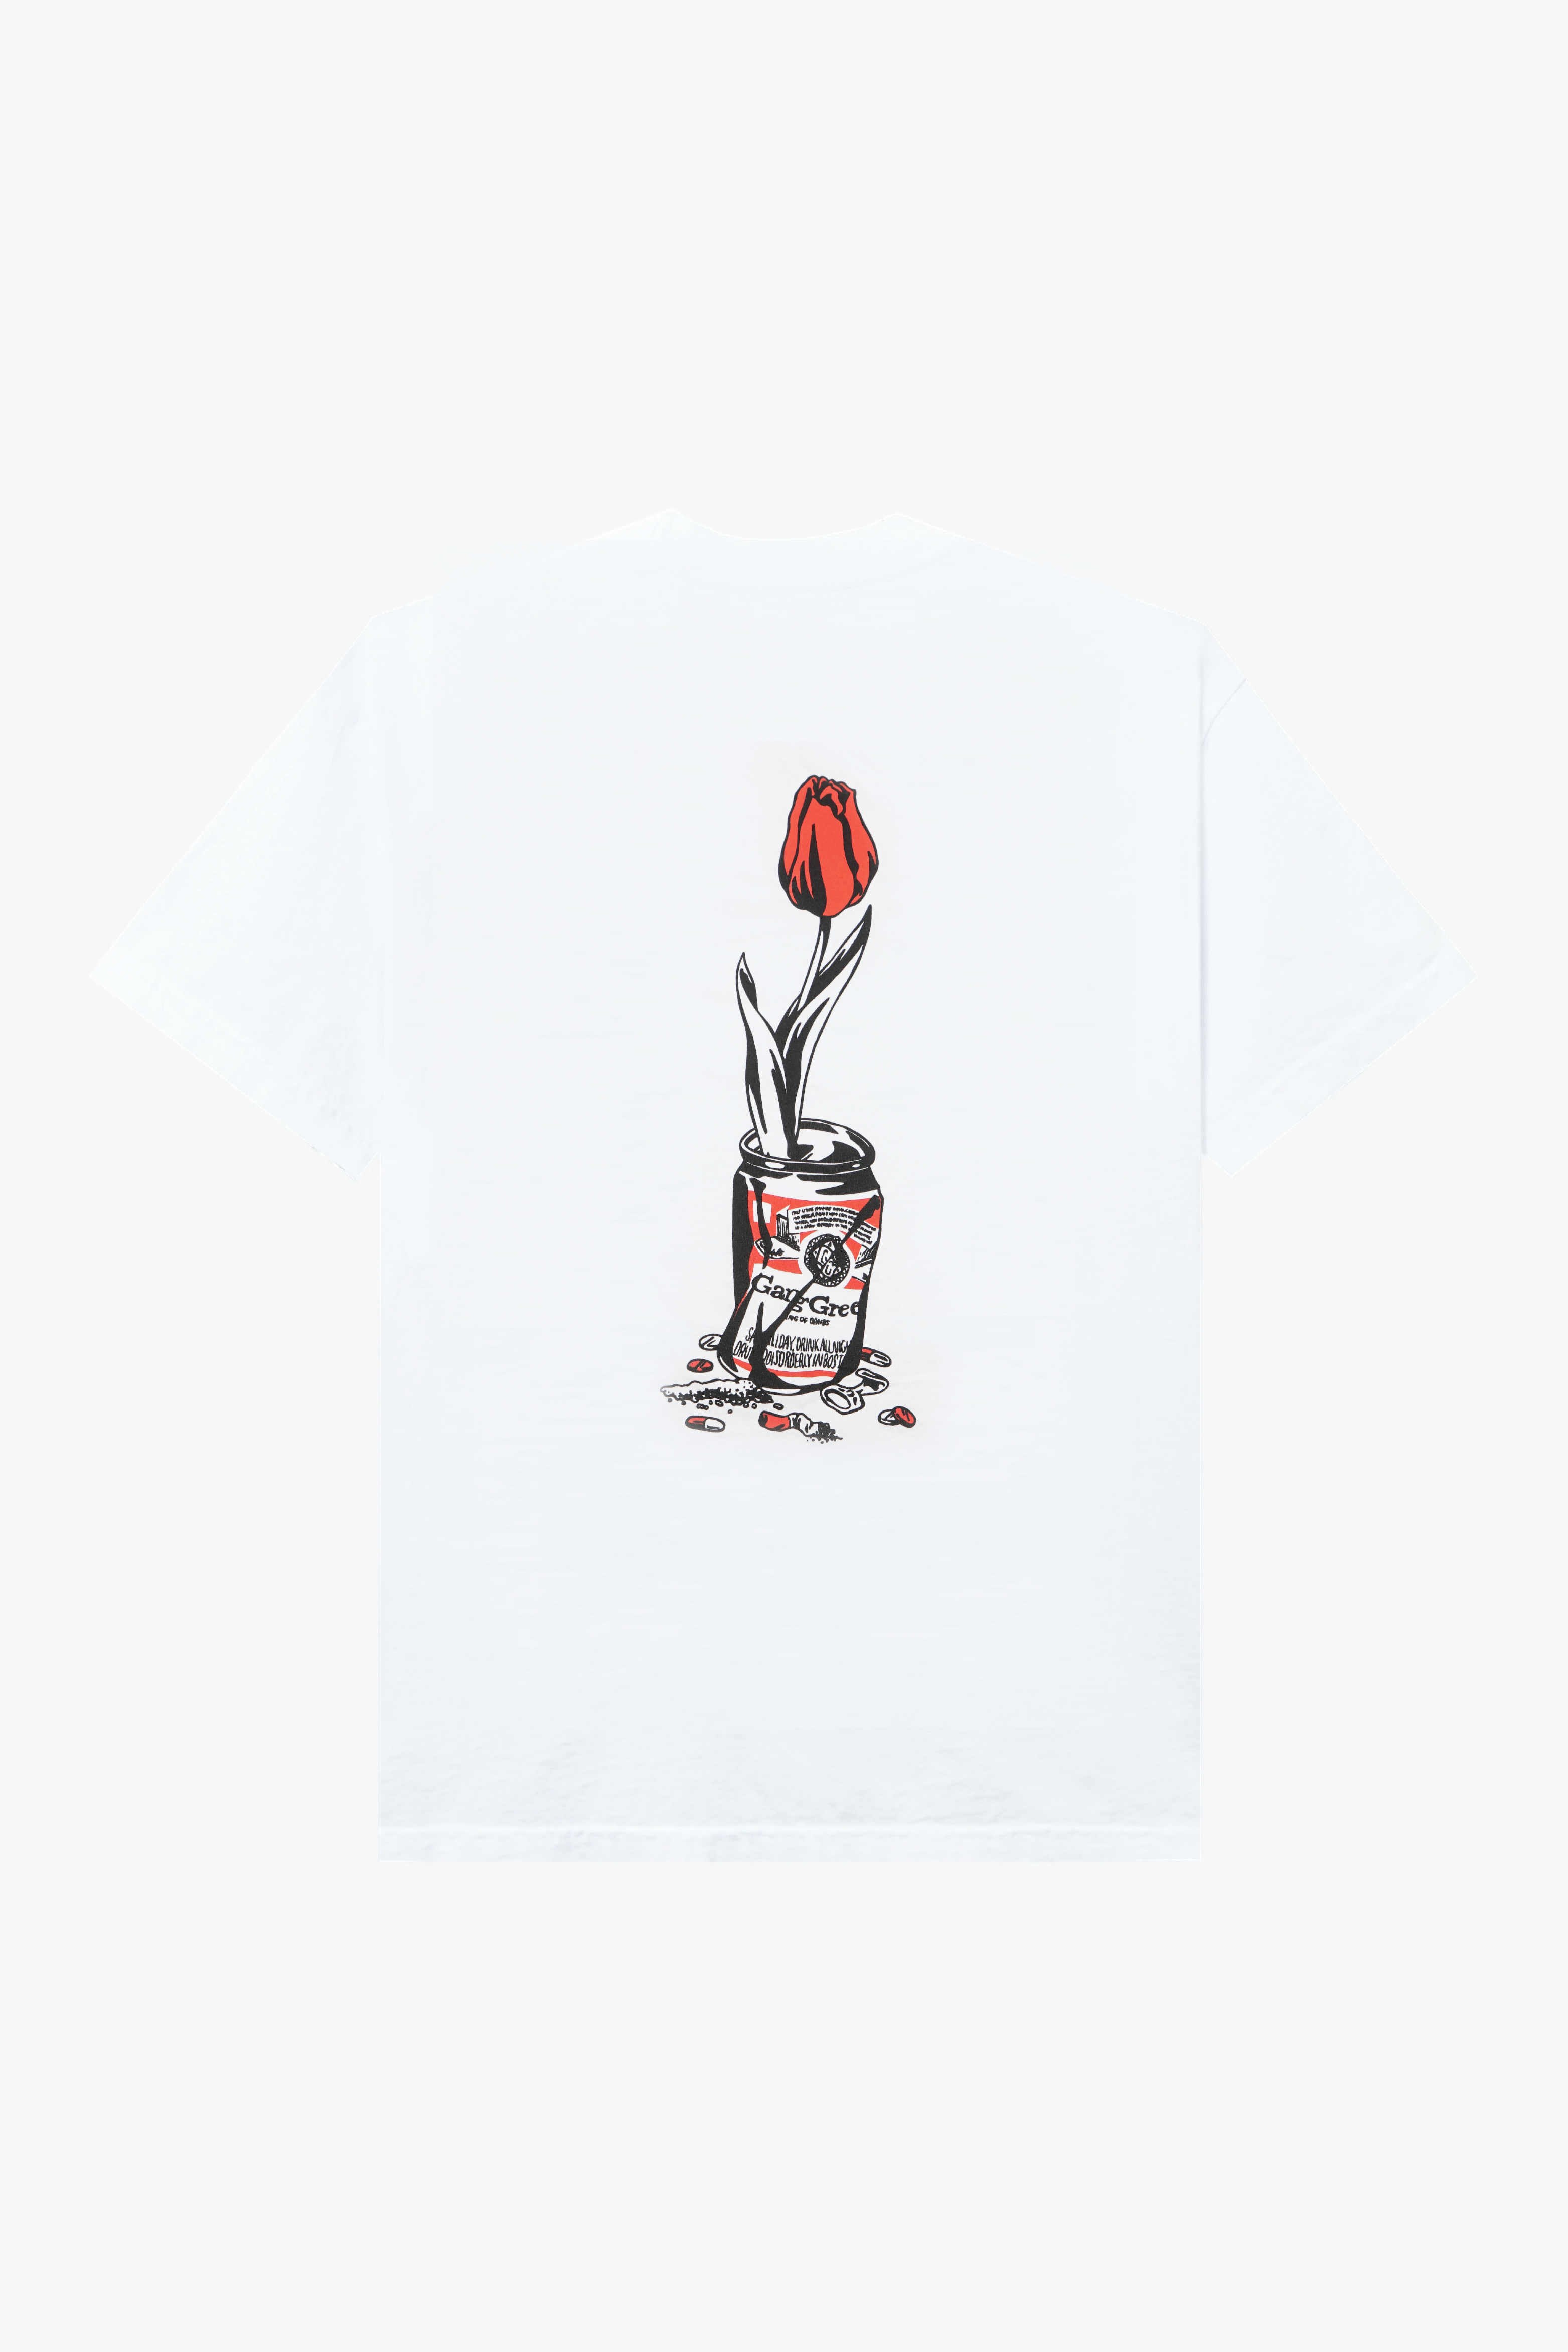 Selectshop FRAME - WASTED YOUTH Wy Flower Can Tee T-Shirts Dubai